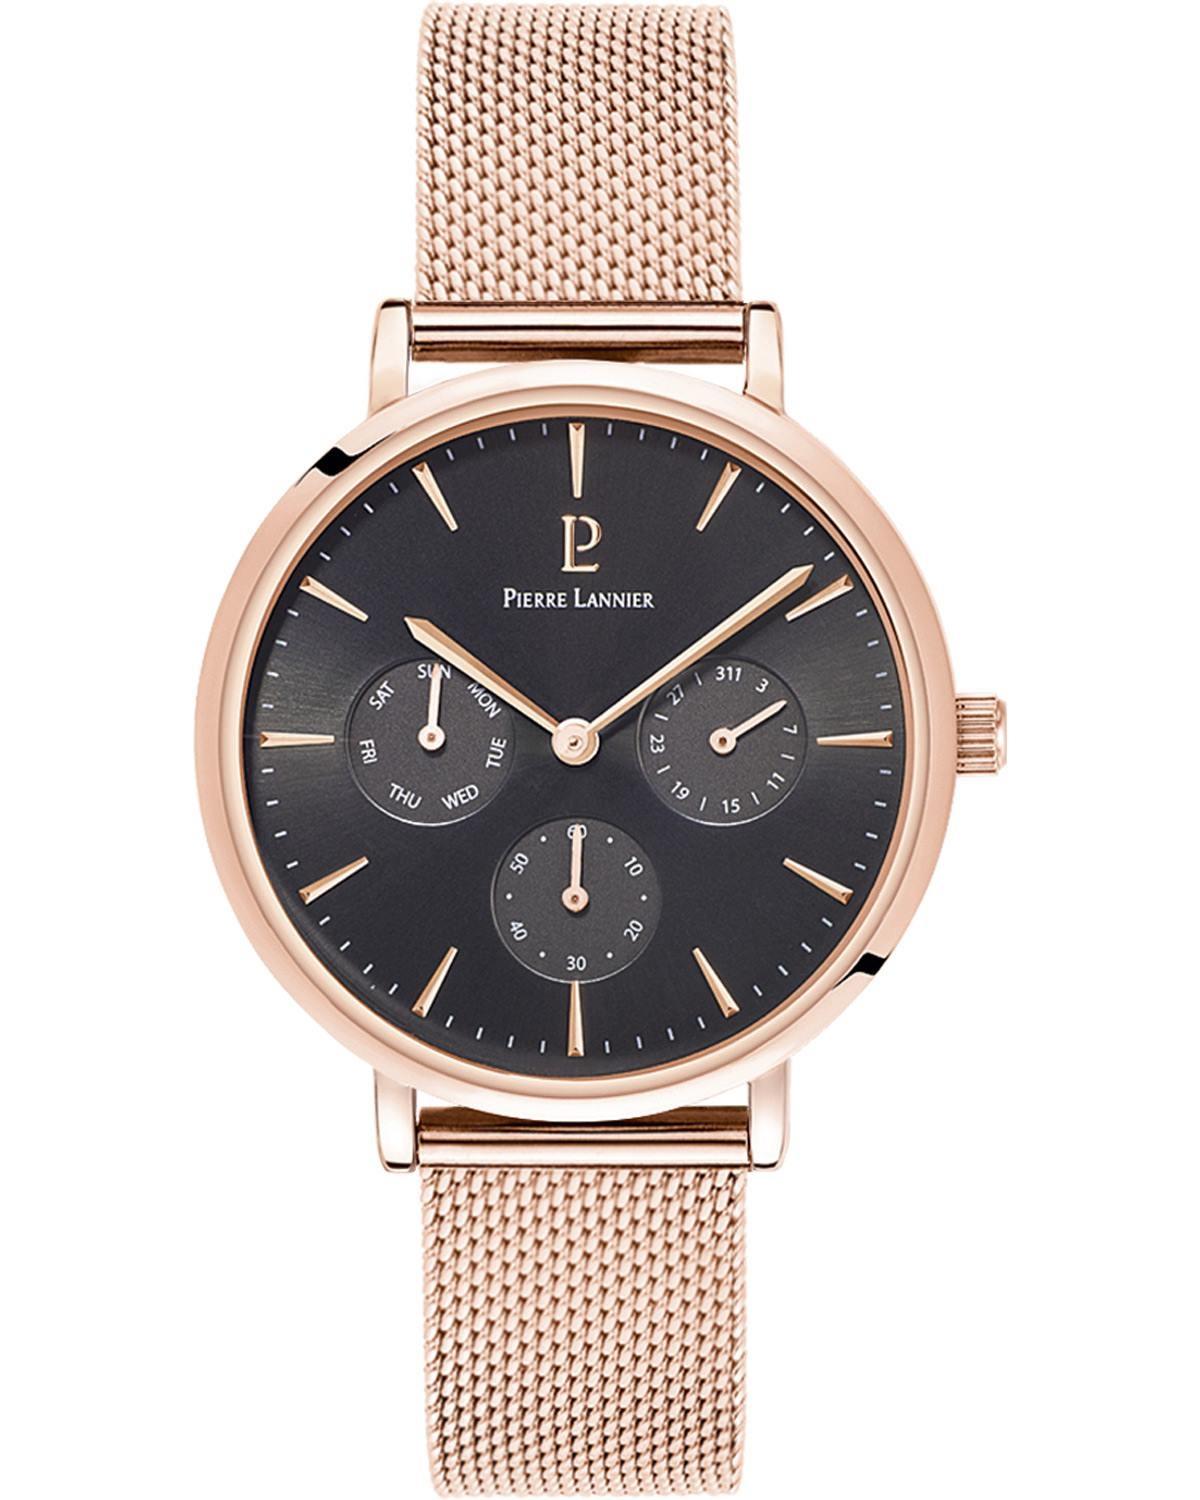 pierre lannier multi 002g988 rose gold case with stainless steel bracelet image1